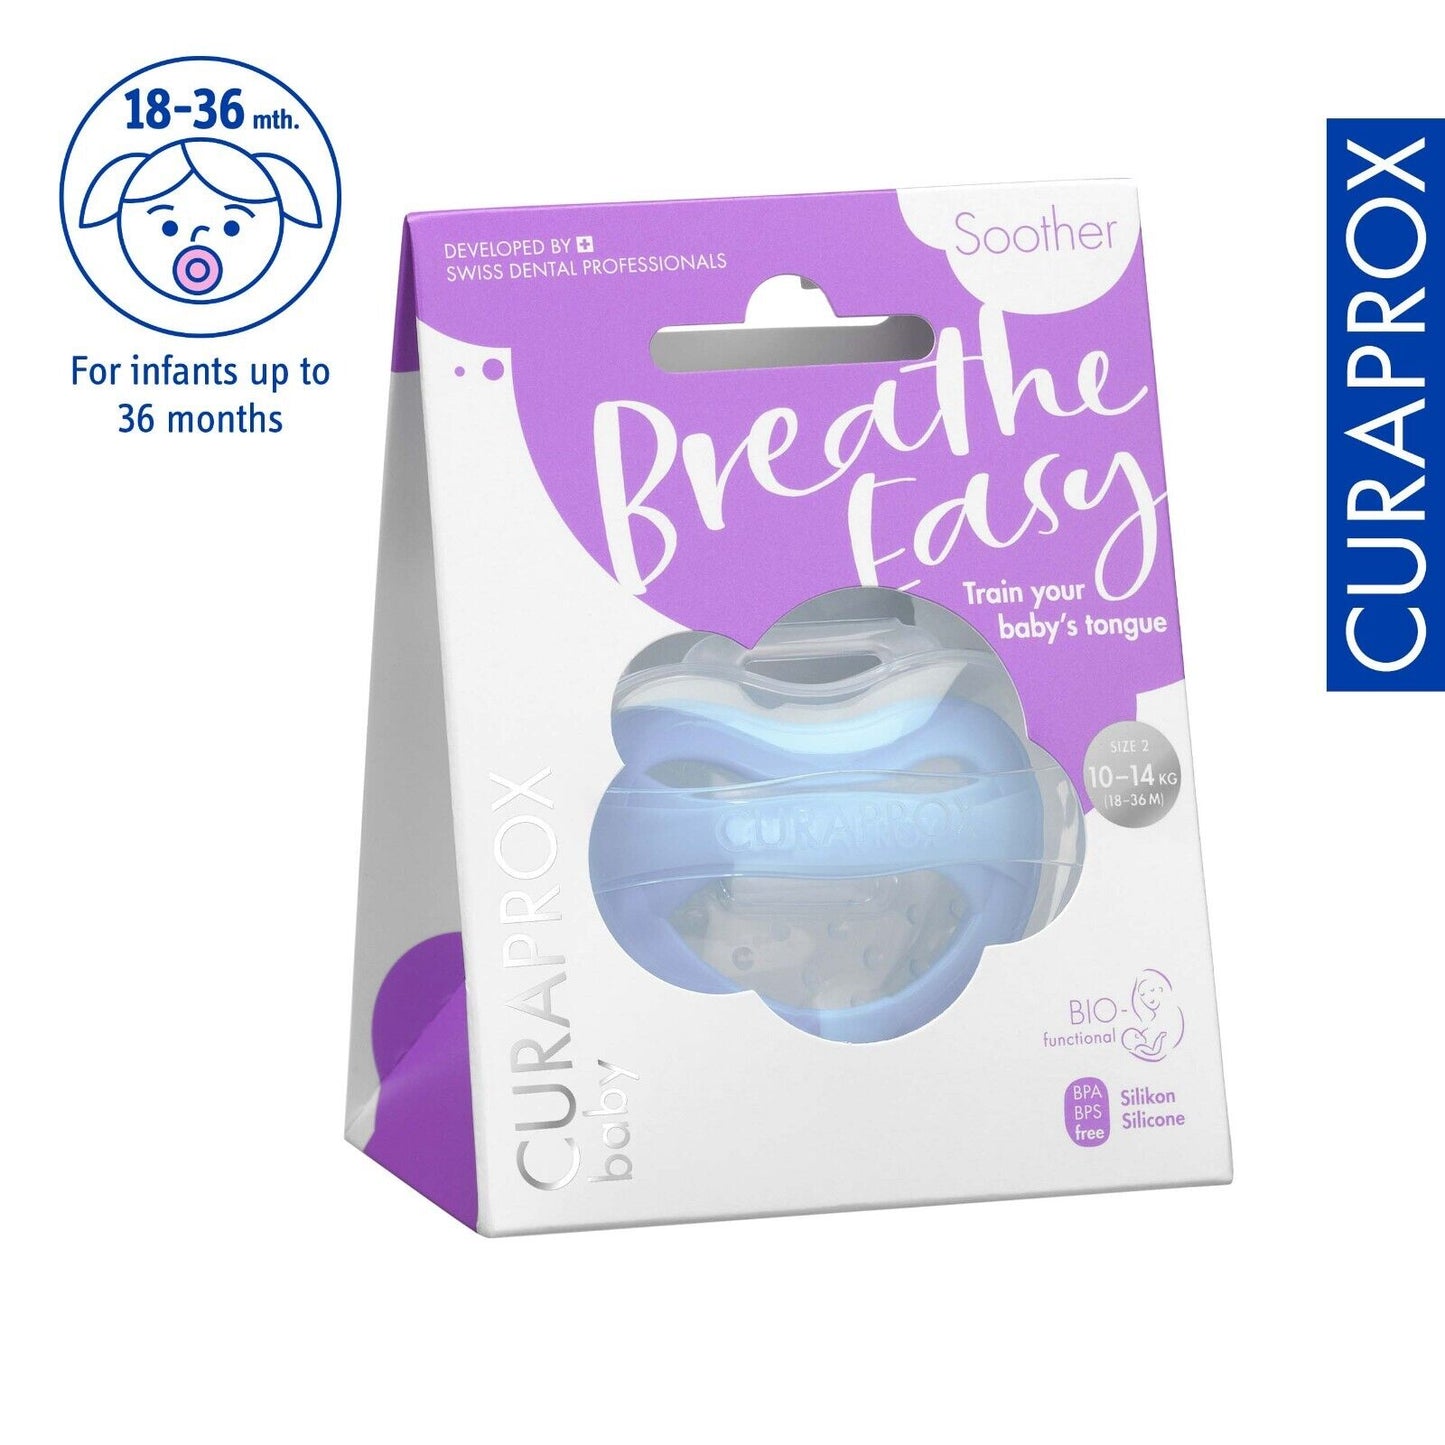 Curaprox soother size 2 (18-36 months)